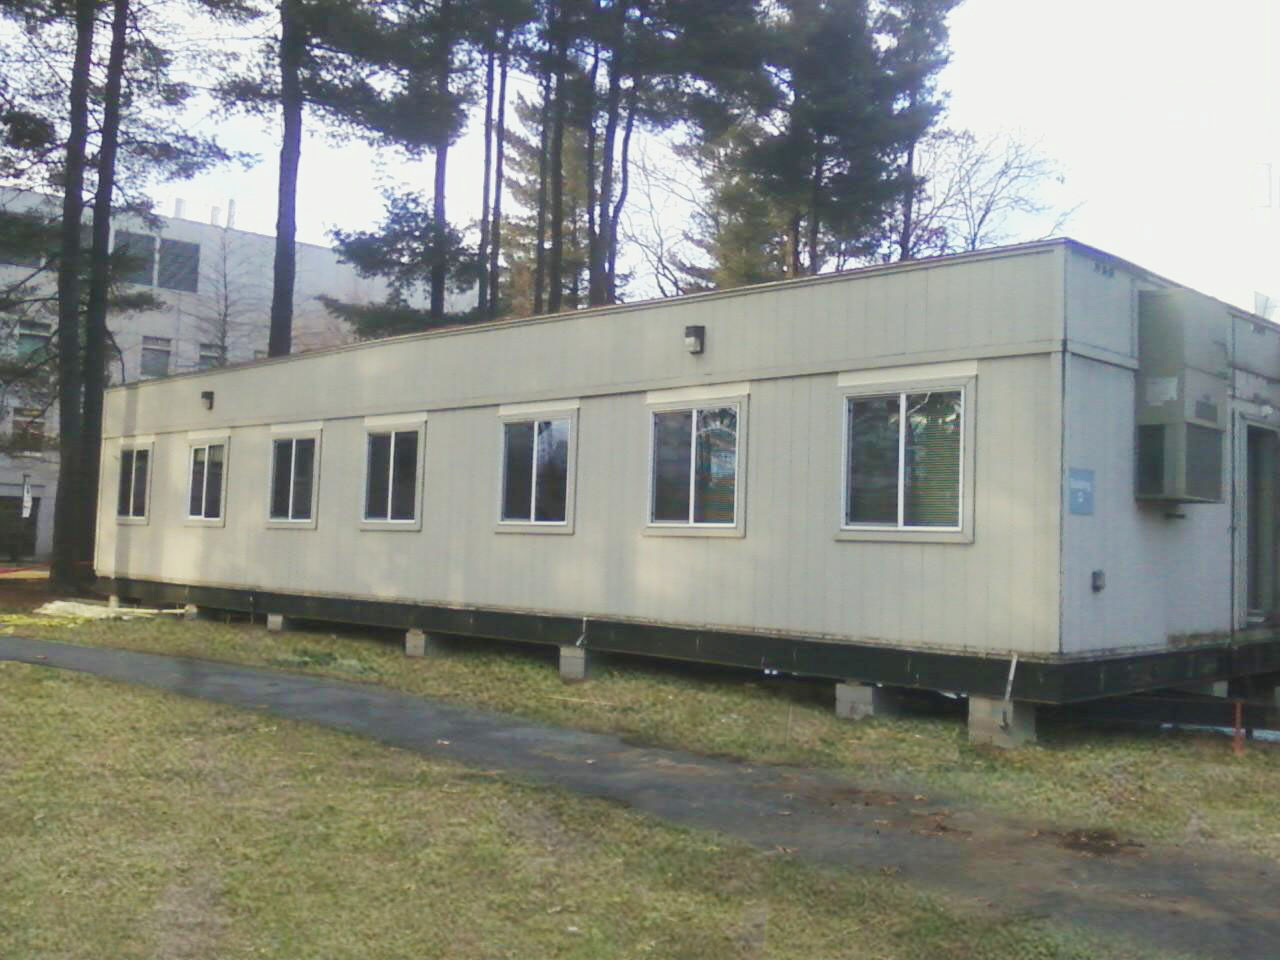 Find a Used Modular Building or Classroom Locally